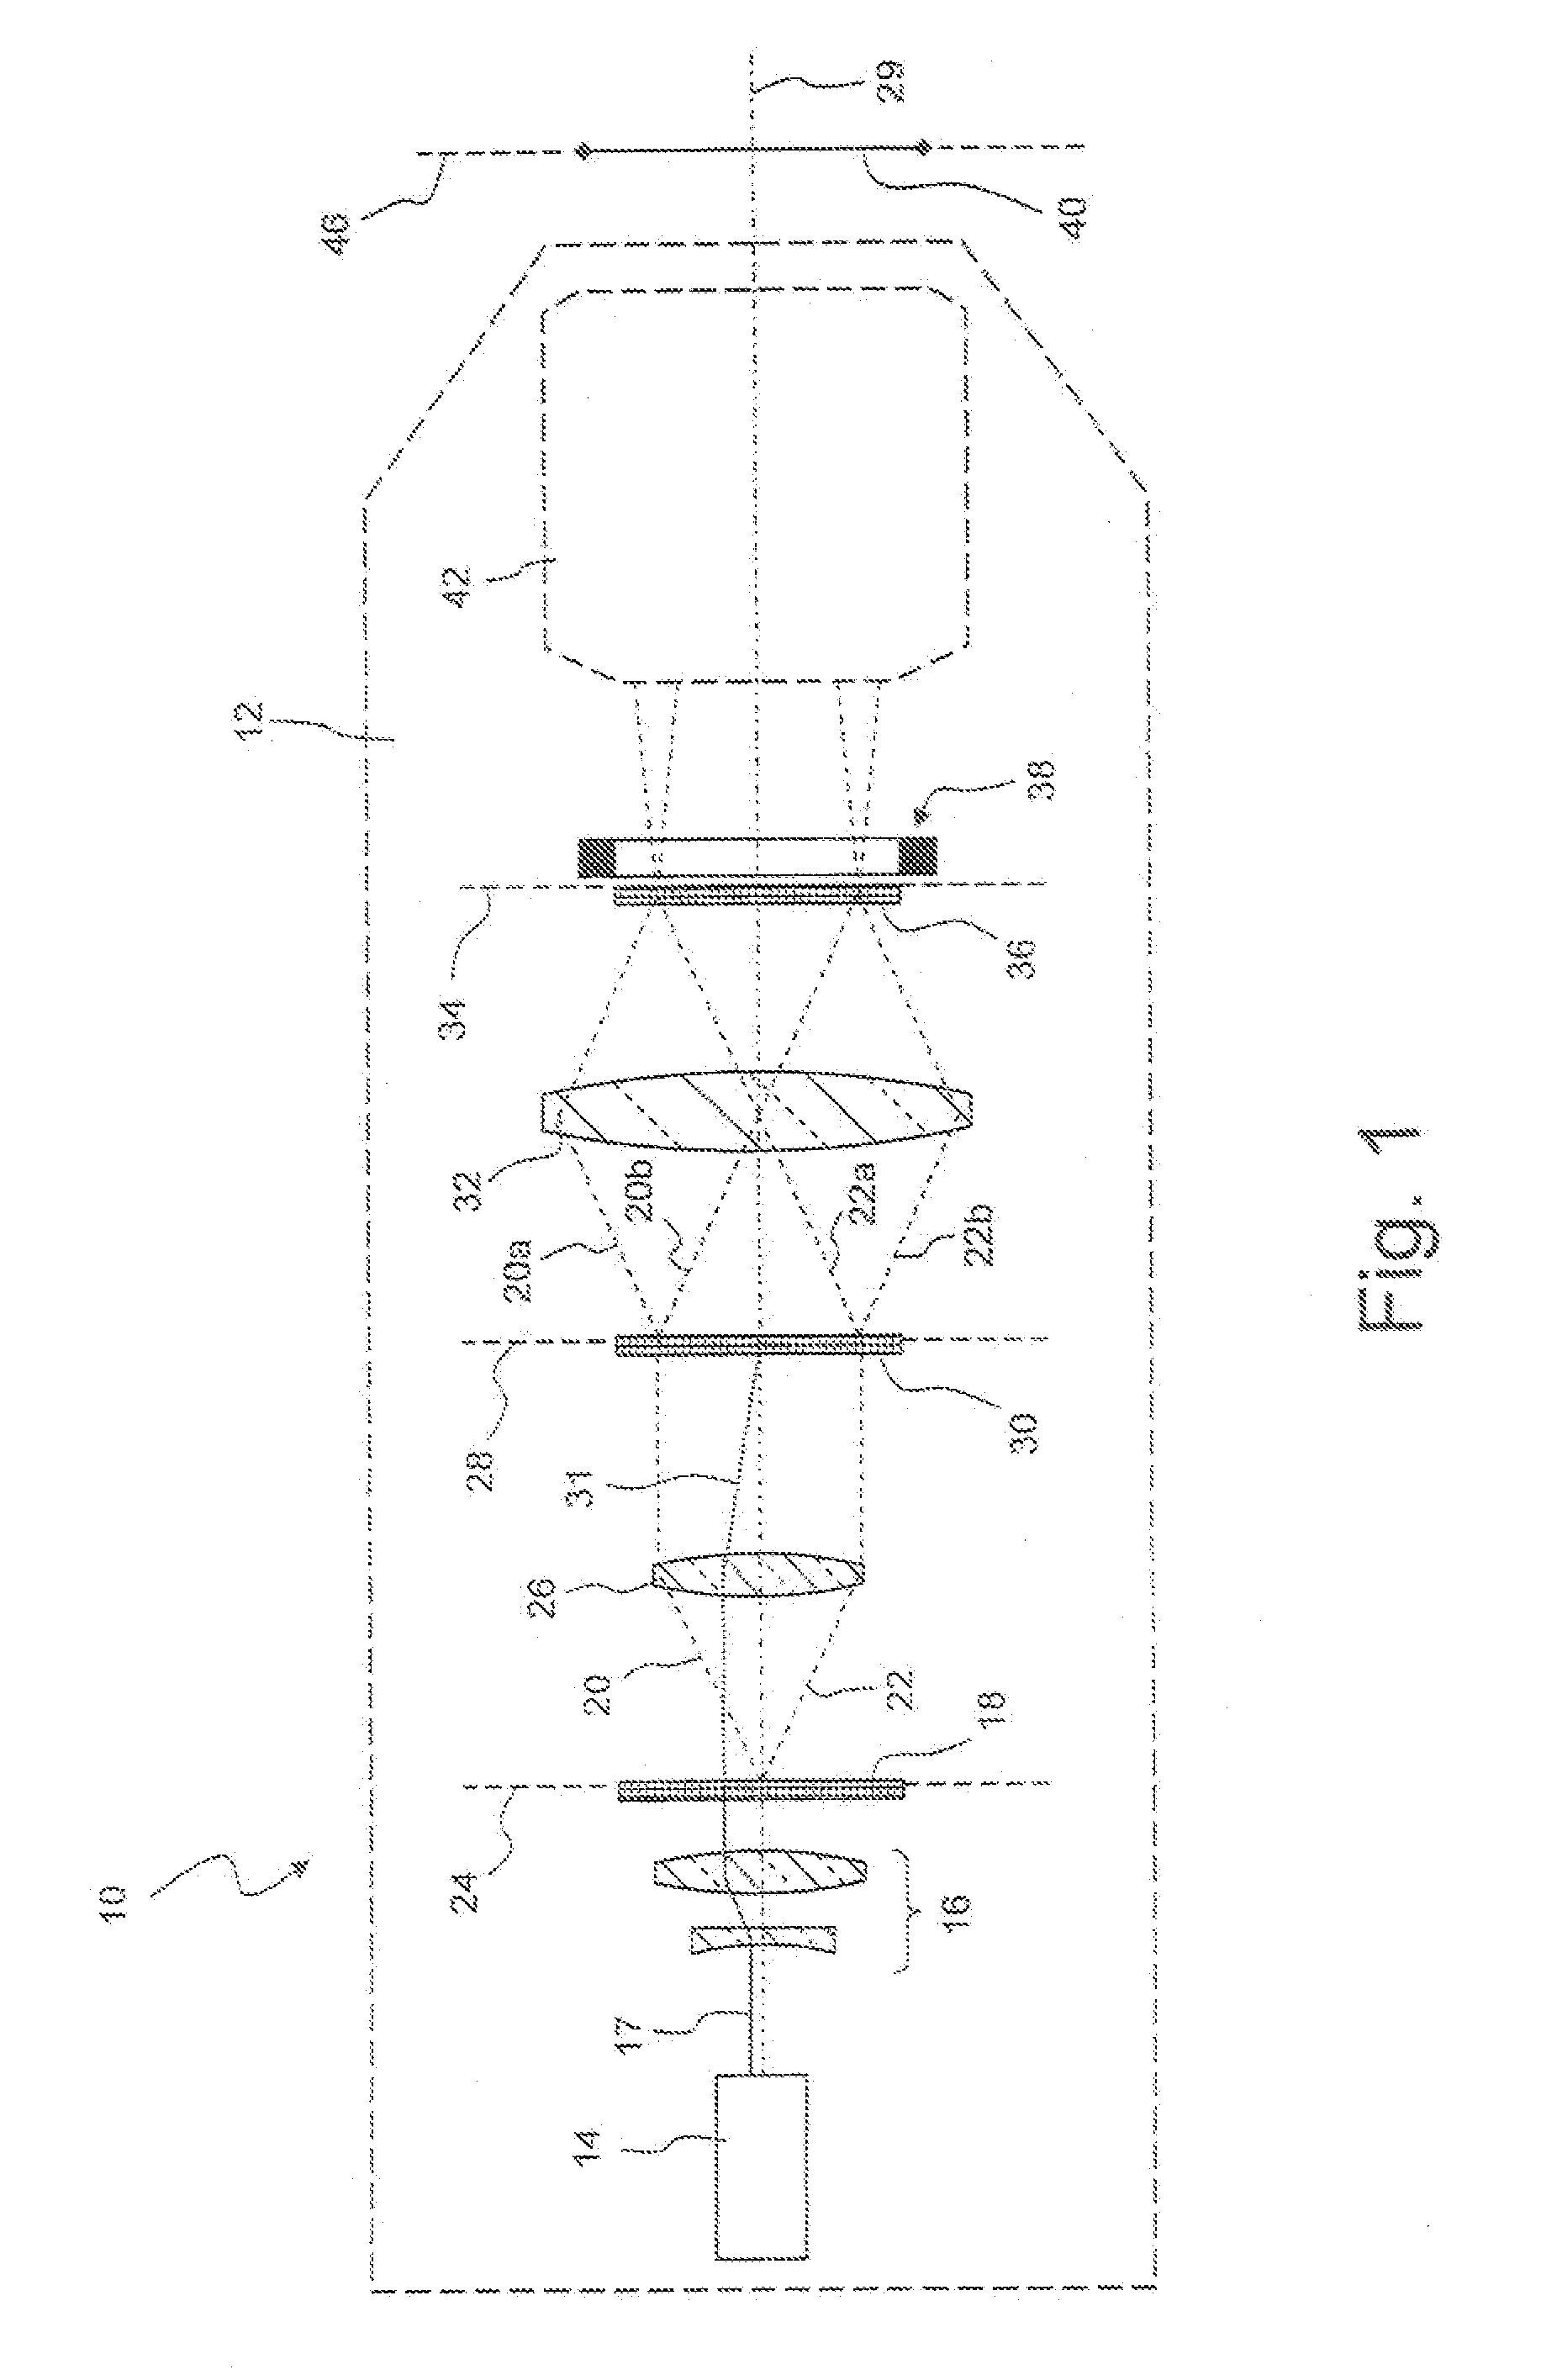 Illumination system for a microlithographic projection exposure apparatus